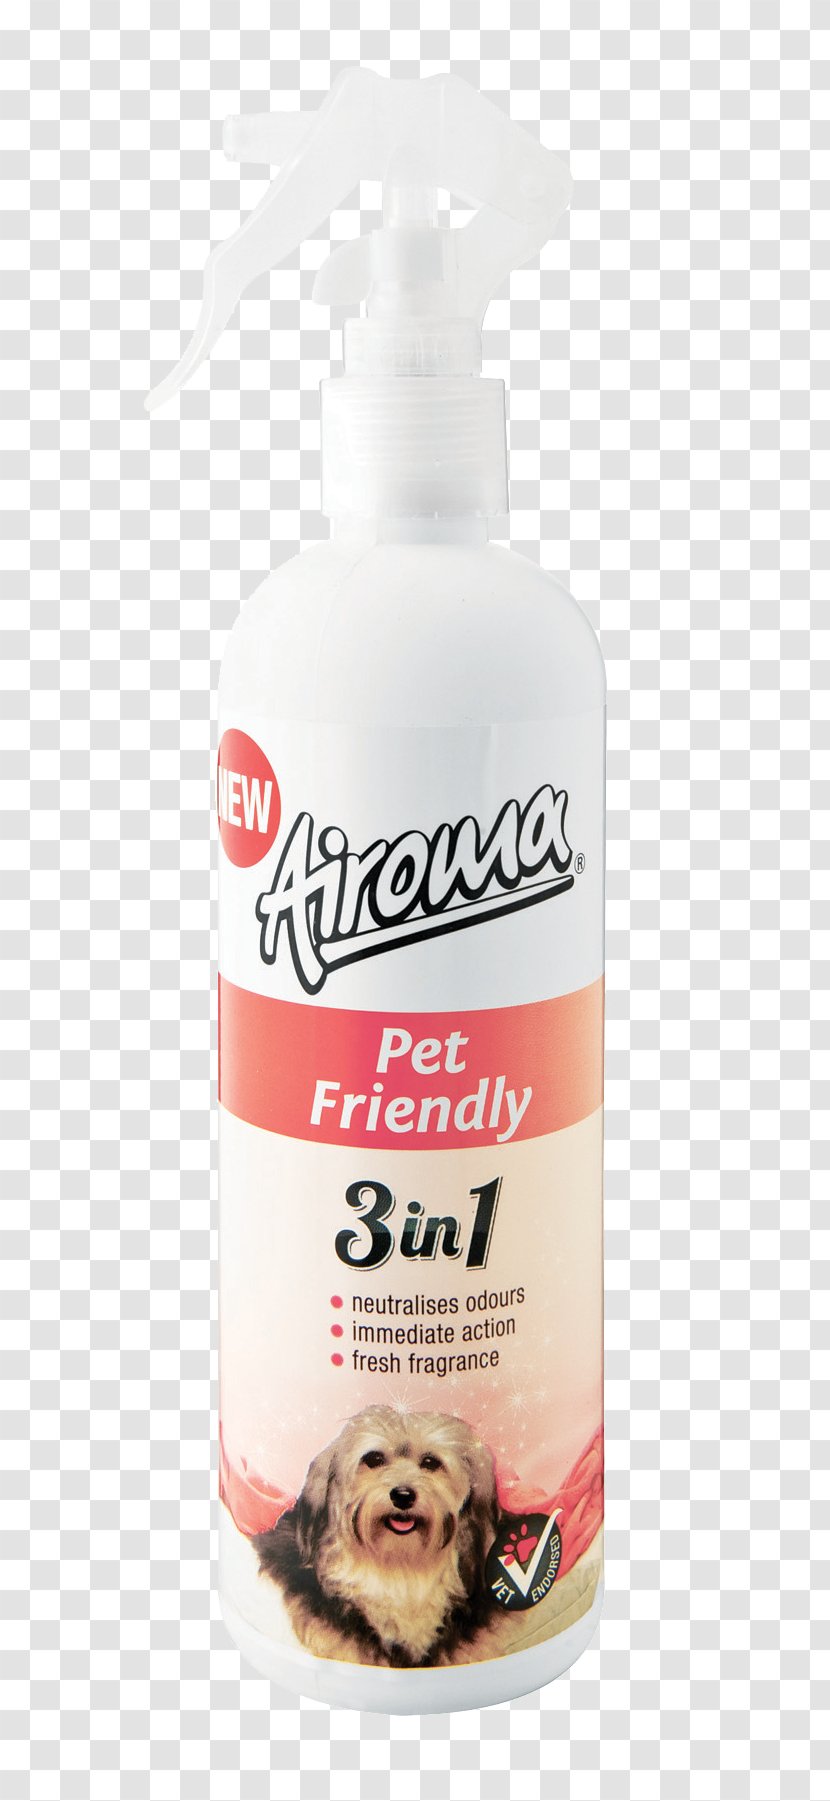 Pet–friendly Hotels Odor Dog Air Fresheners - Petfriendly - Pet Friendly Transparent PNG